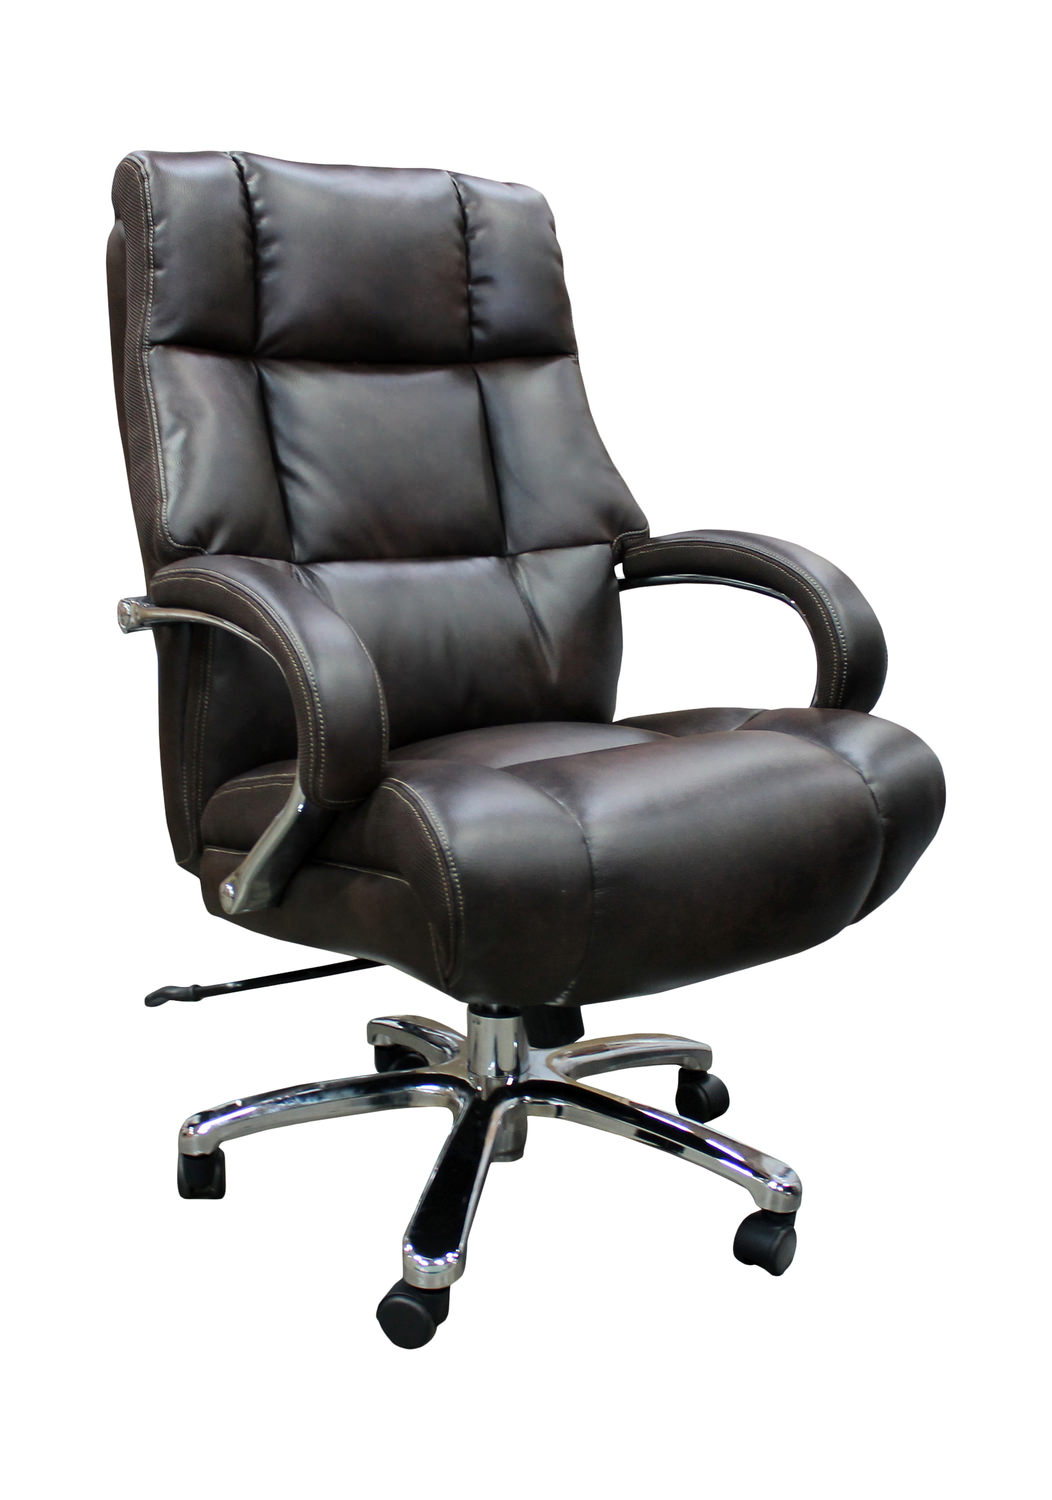 Gliders Adjustable Desk Chair Back Support Comfy Executive Office